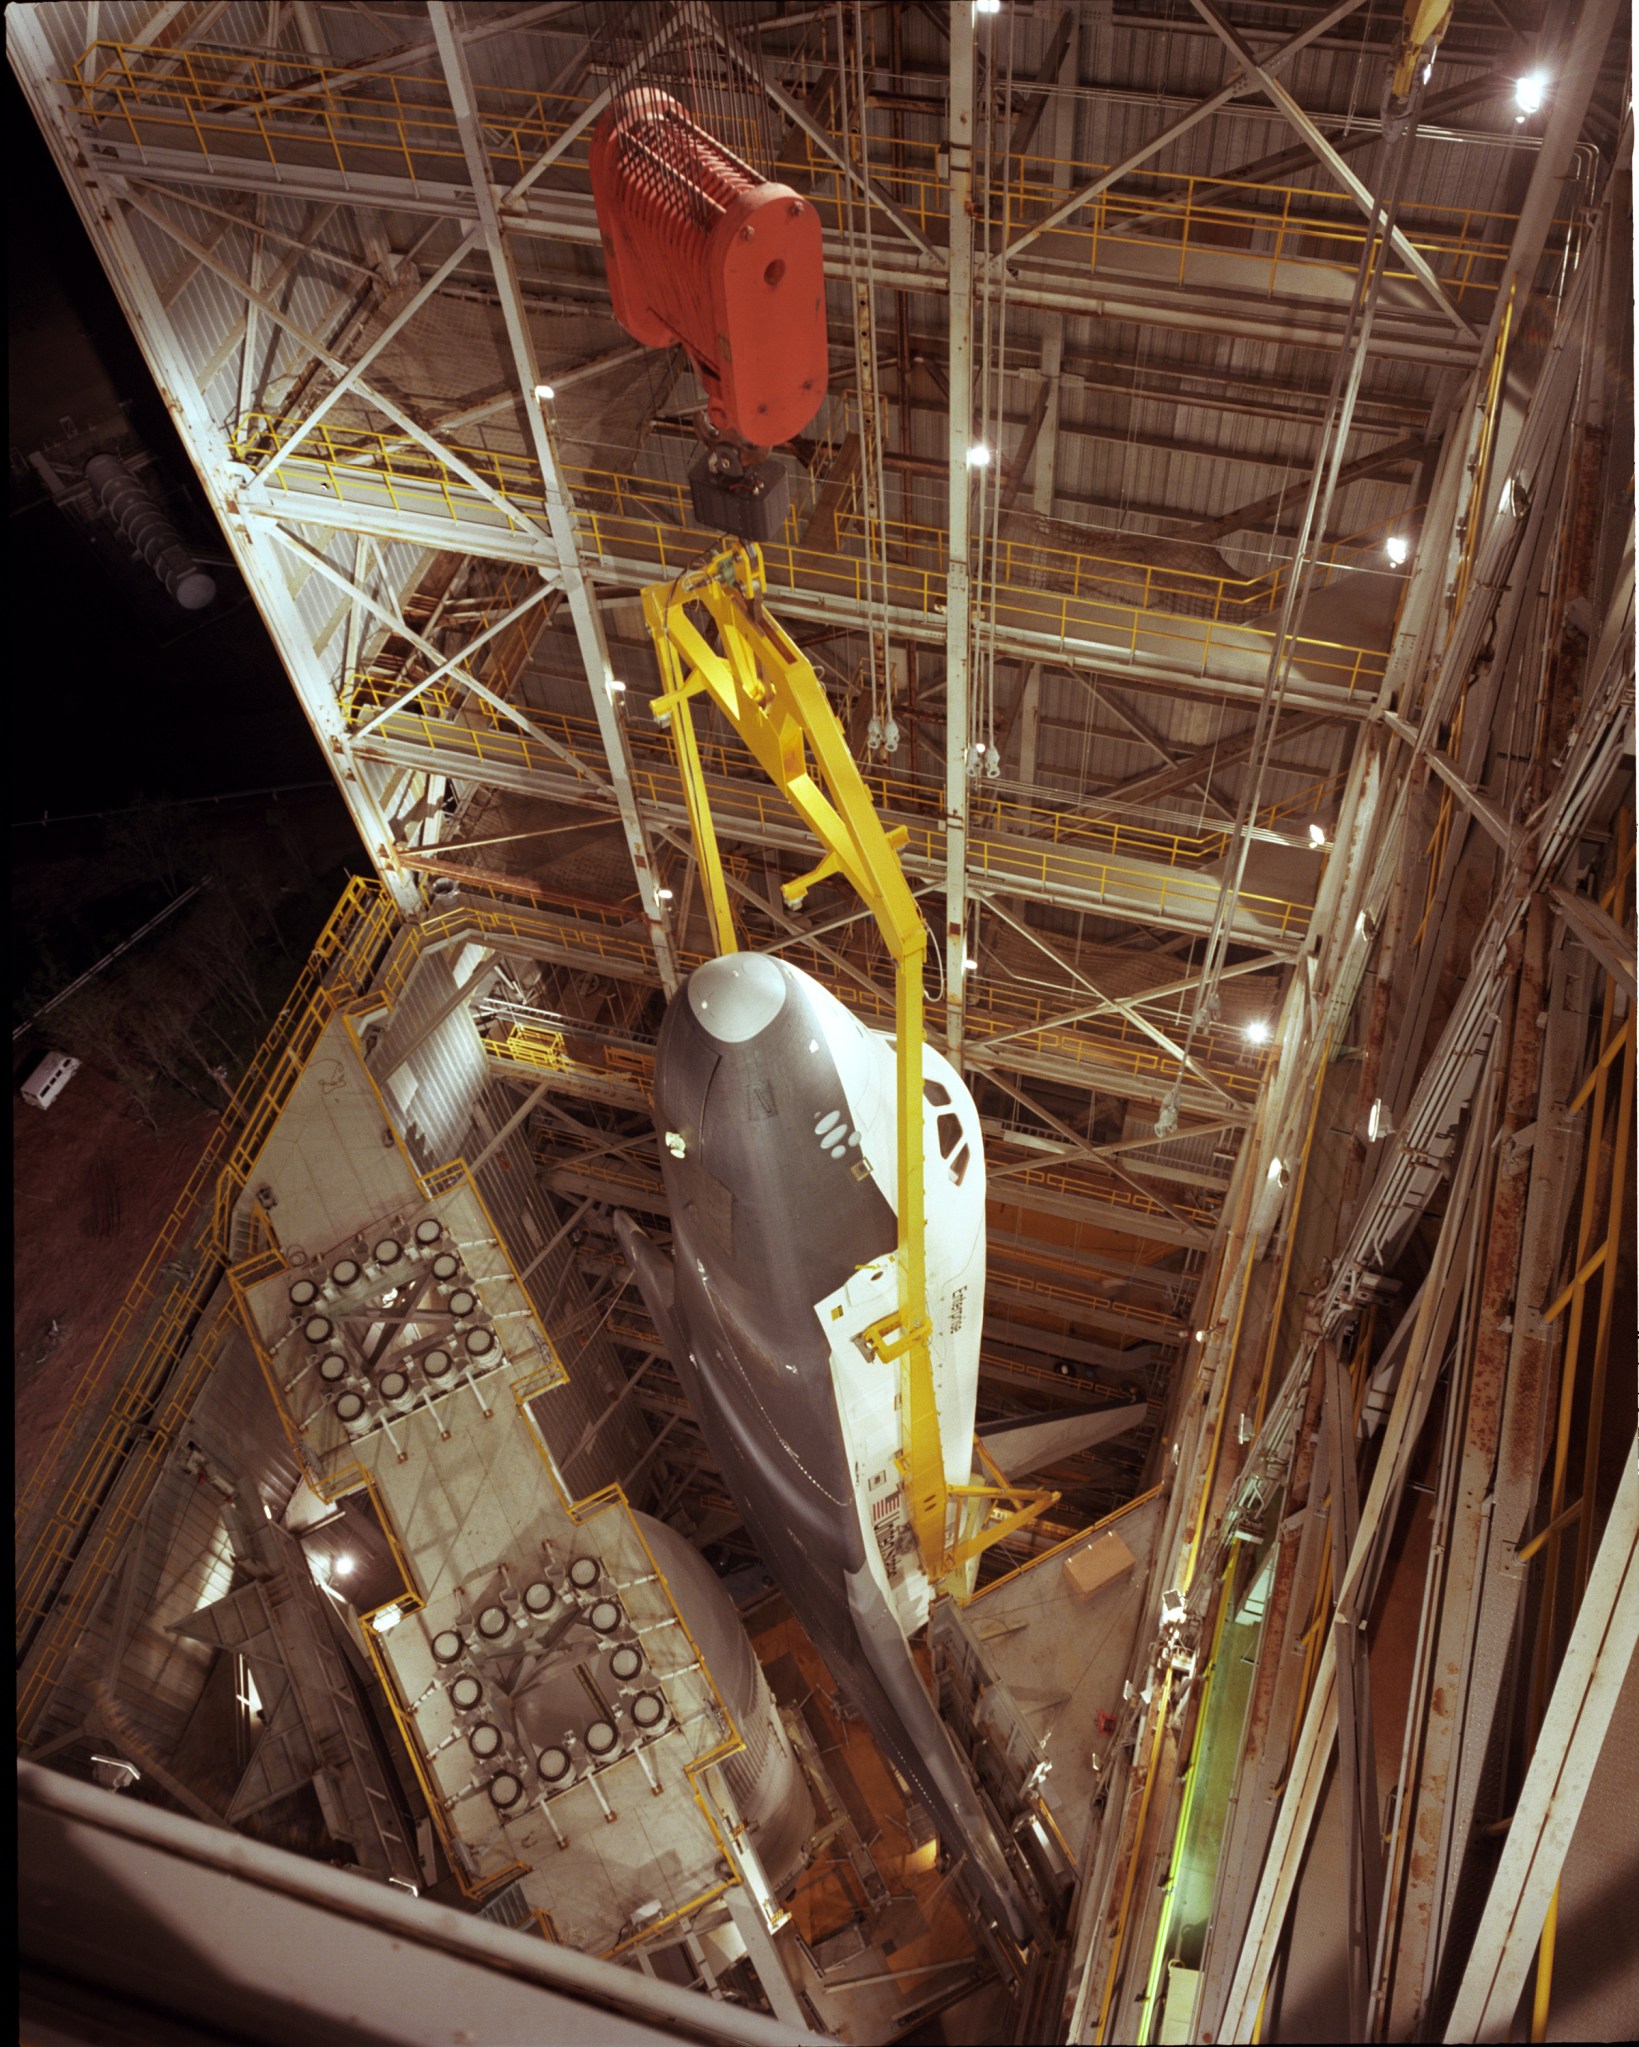 This week in 1978, the space shuttle Enterprise was lifted into the Dynamic Test Stand at NASA’s Marshall Space Flight Center.